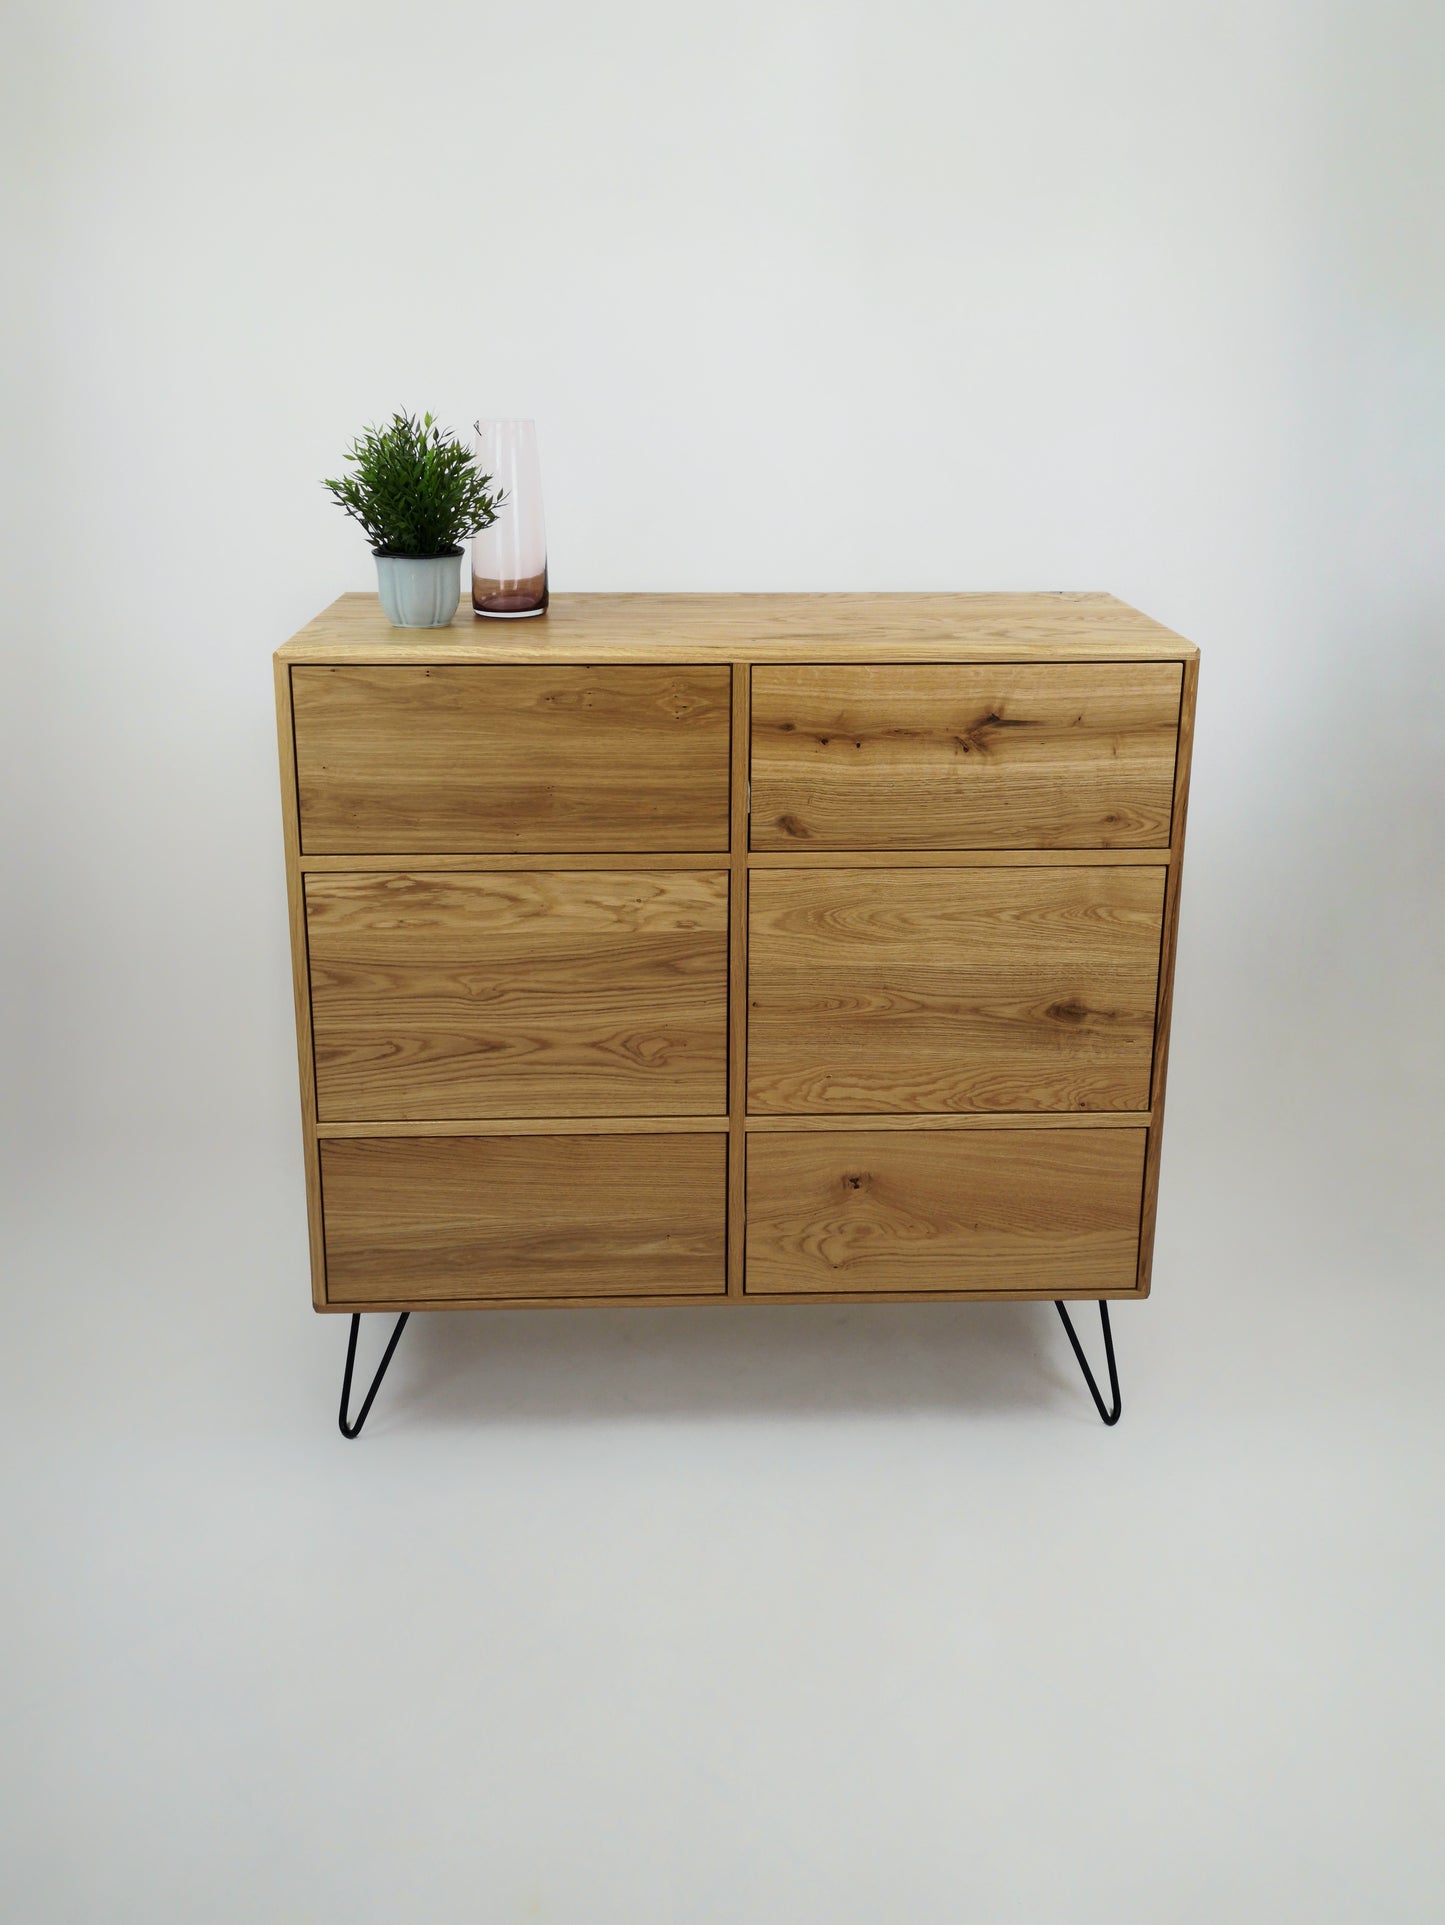 LILU chest of drawers